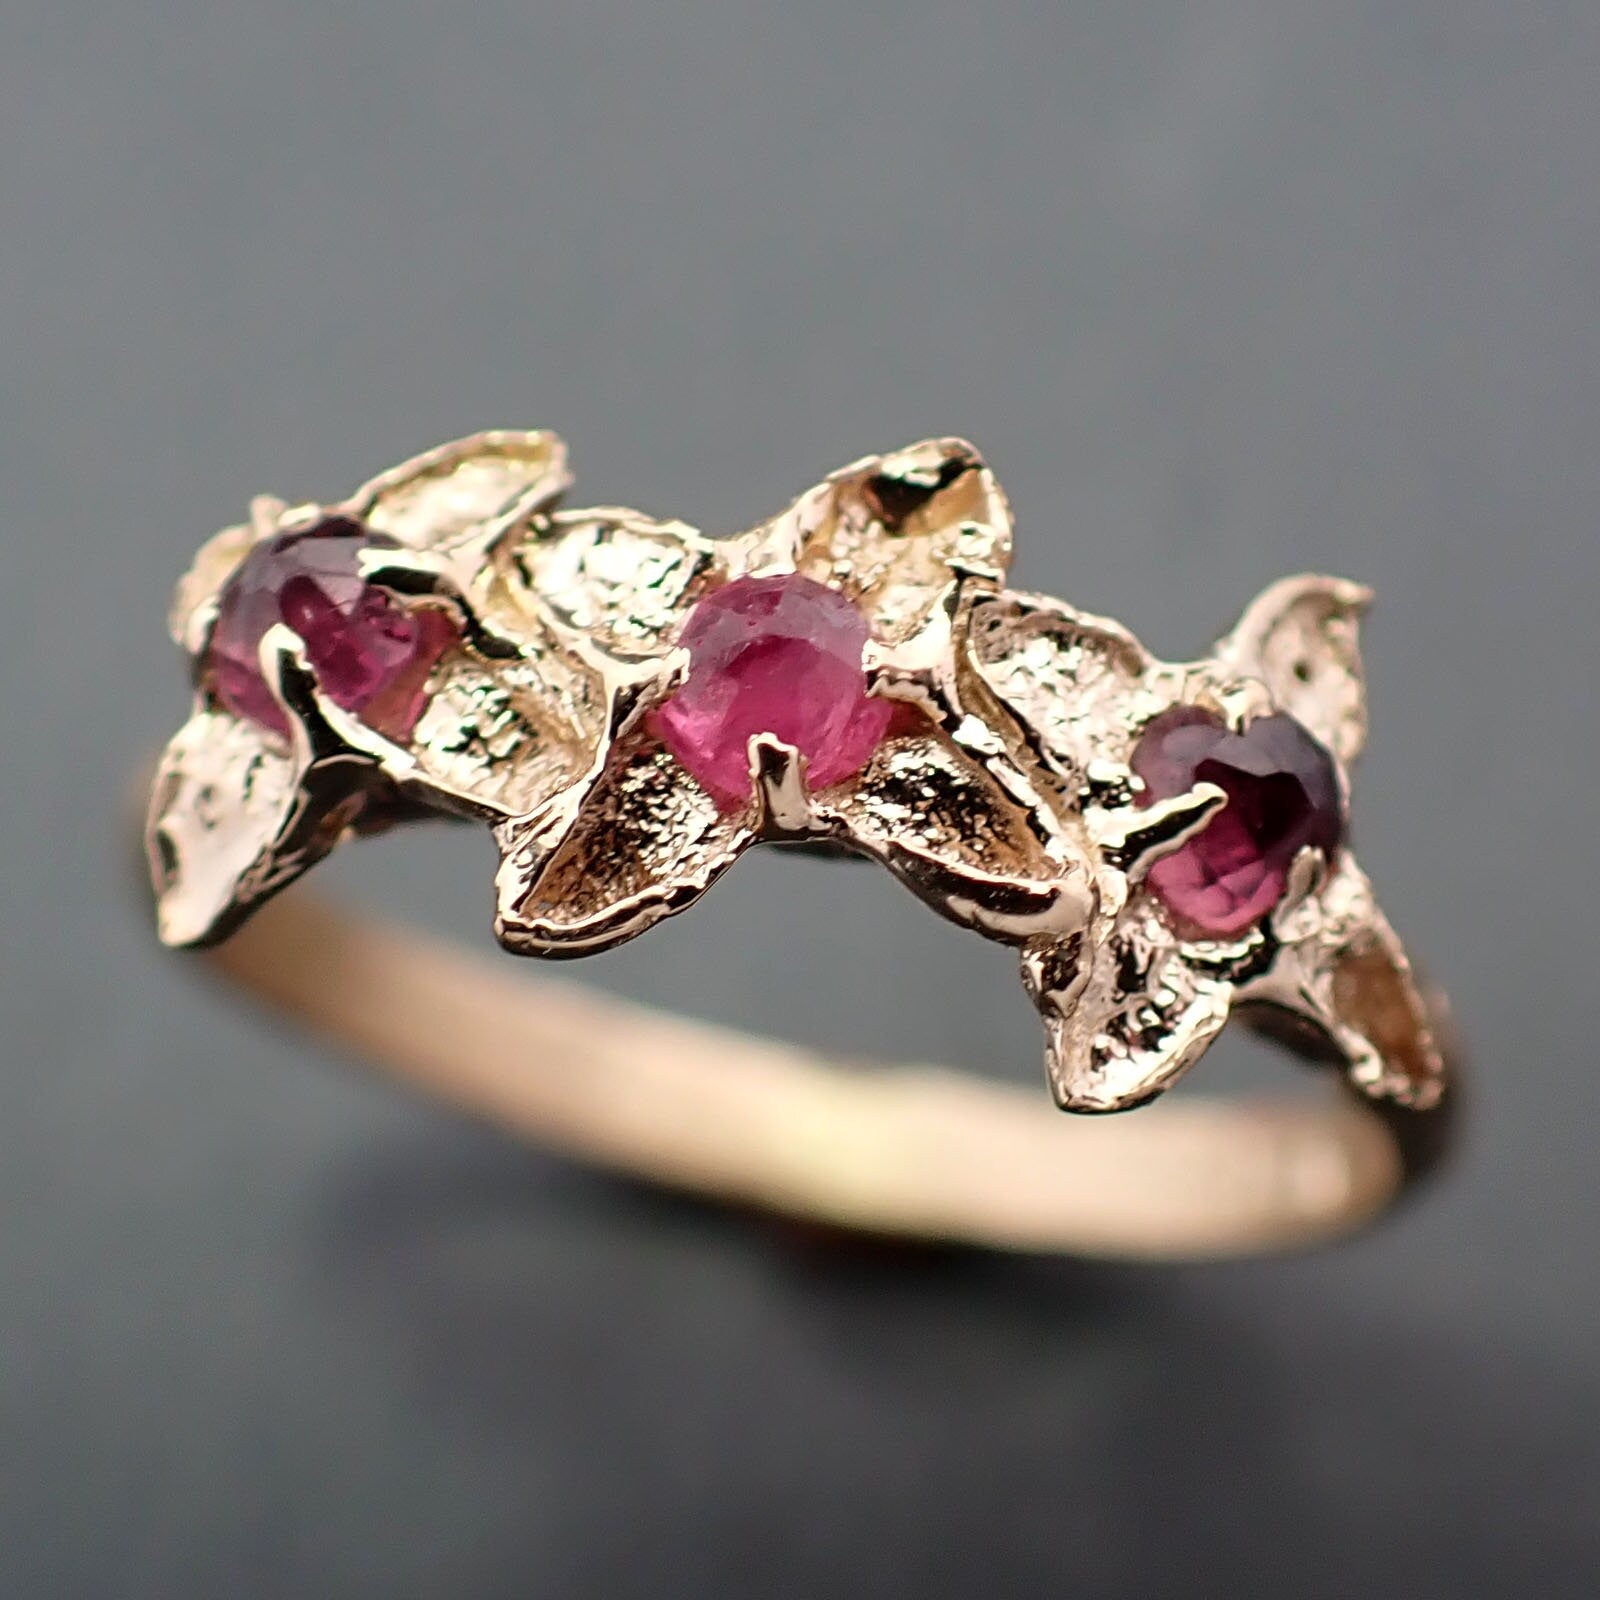 Real Lilac Flower casting with faceted Rubies 14k Yellow gold multi stone Enchanted Garden Floral Ring byAngeline 3375